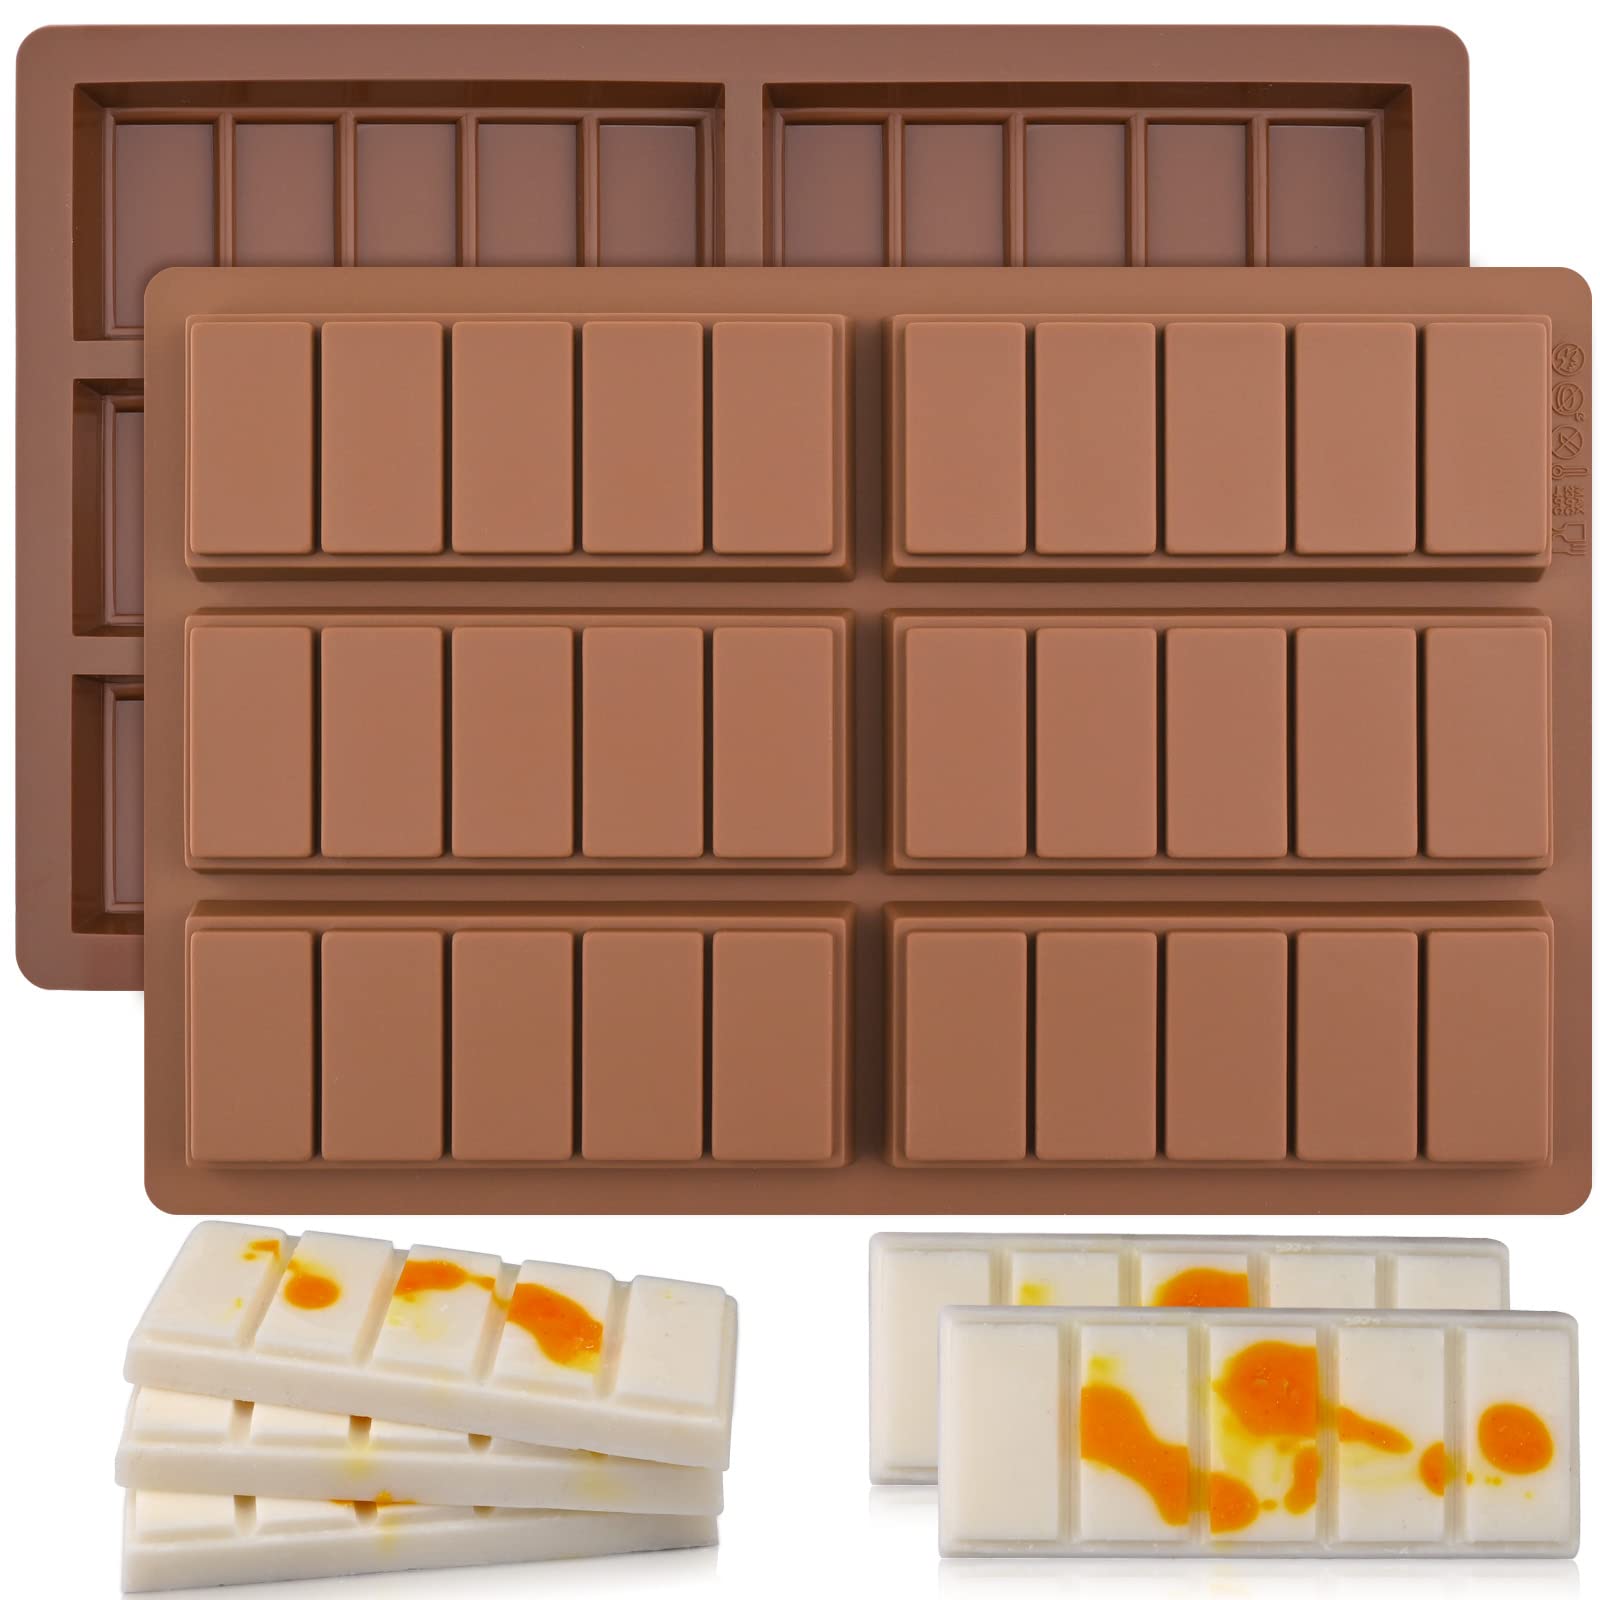 Silicone Candy Mould - Food and Beverage Mould